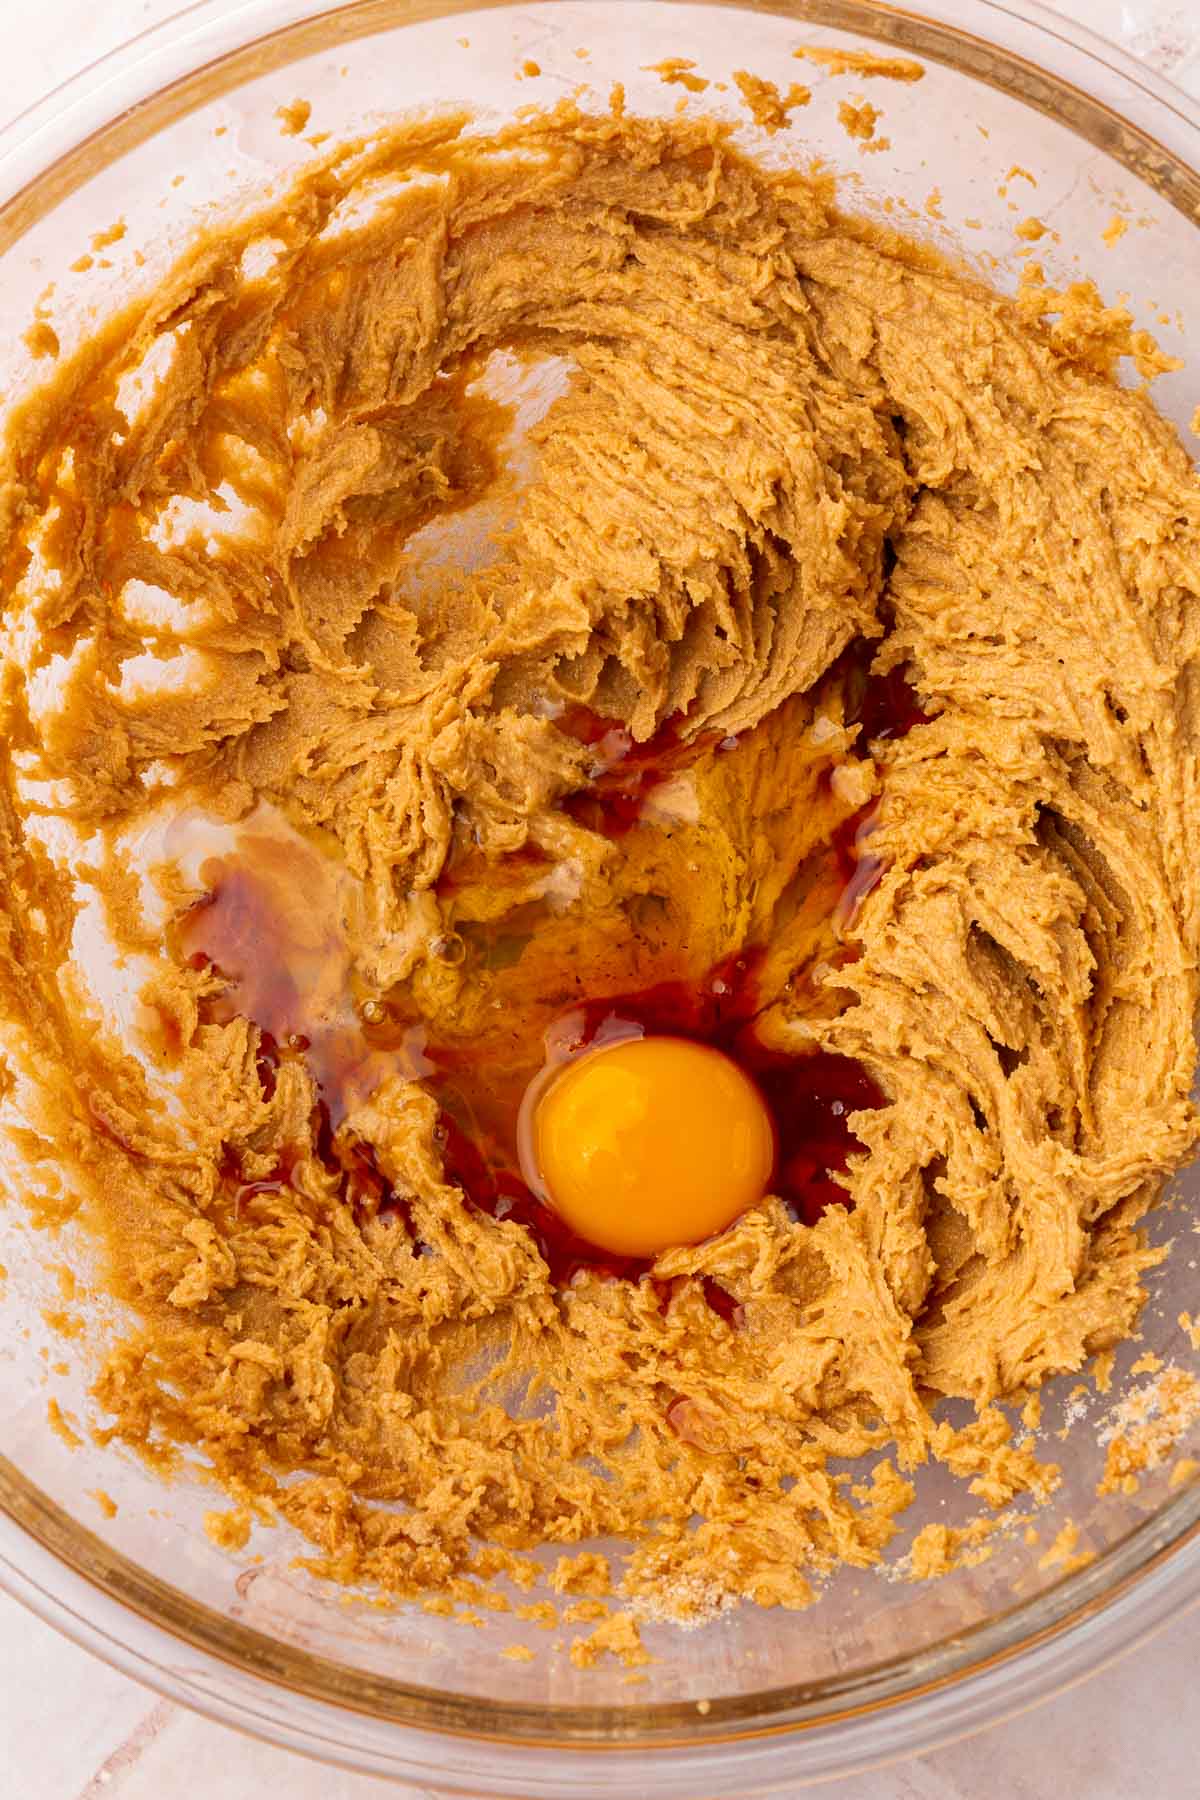 A glass mixing bowl with a peanut butter sugar mixture topped with a raw egg and vanilla extract before mixing together.